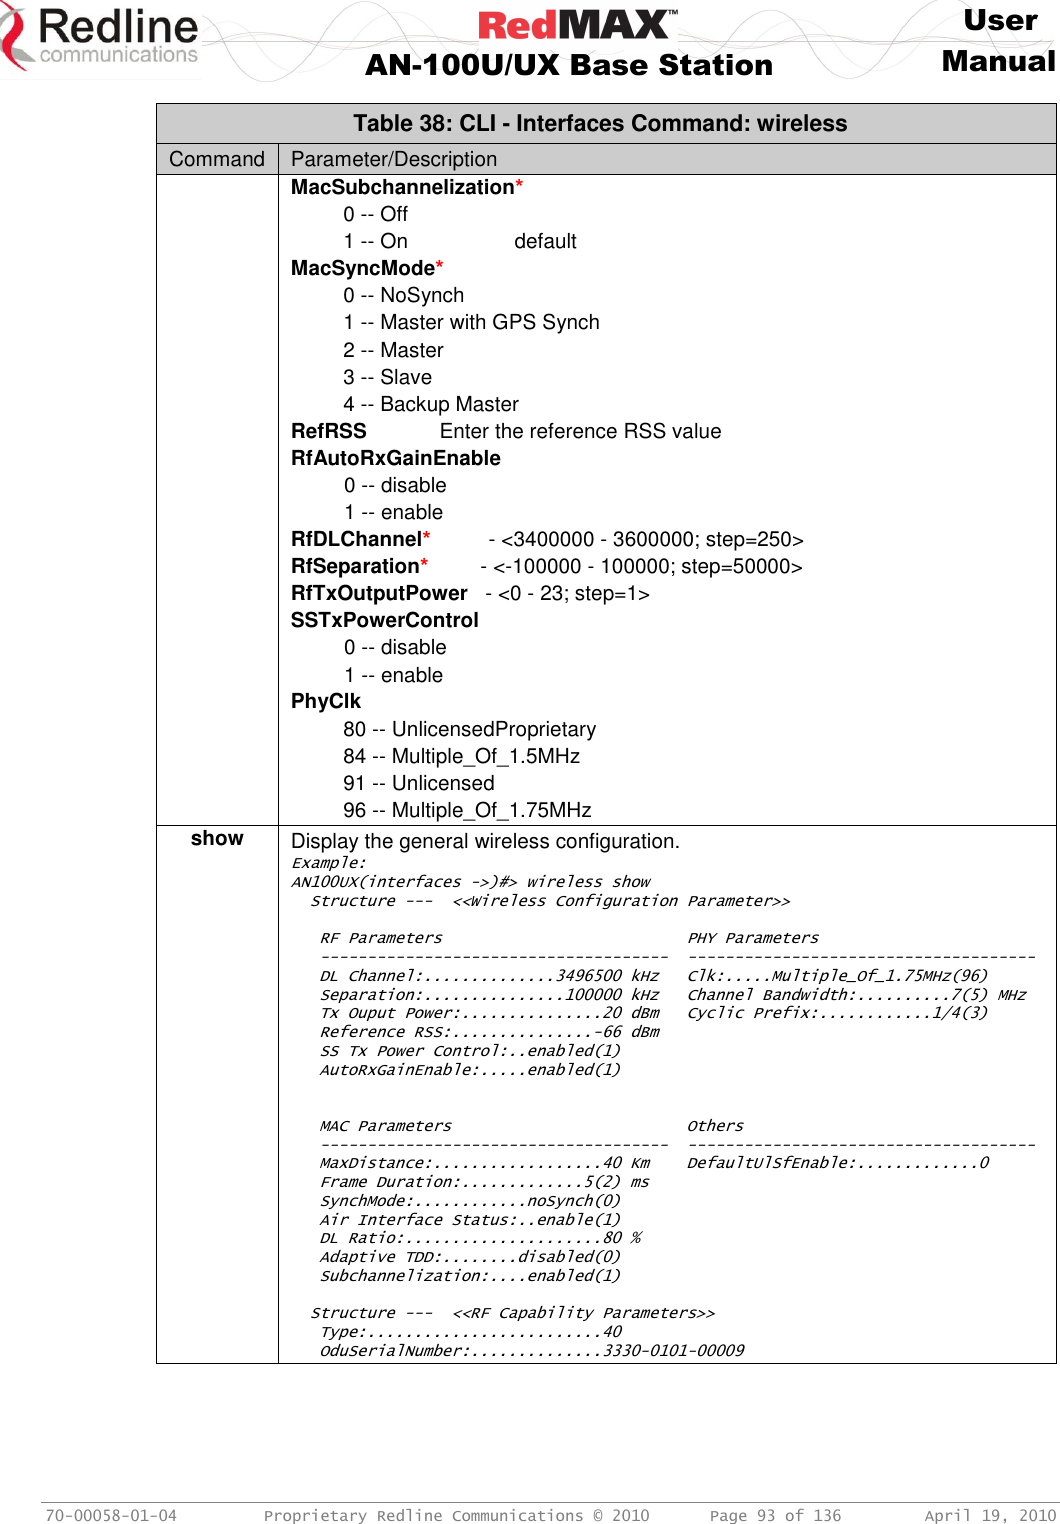     User  AN-100U/UX Base Station Manual   70-00058-01-04  Proprietary Redline Communications © 2010   Page 93 of 136  April 19, 2010 Table 38: CLI - Interfaces Command: wireless Command Parameter/Description MacSubchannelization*  0 -- Off  1 -- On    default MacSyncMode*  0 -- NoSynch  1 -- Master with GPS Synch  2 -- Master  3 -- Slave  4 -- Backup Master RefRSS  Enter the reference RSS value RfAutoRxGainEnable  0 -- disable  1 -- enable RfDLChannel*          - &lt;3400000 - 3600000; step=250&gt; RfSeparation*         - &lt;-100000 - 100000; step=50000&gt; RfTxOutputPower   - &lt;0 - 23; step=1&gt; SSTxPowerControl  0 -- disable  1 -- enable PhyClk   80 -- UnlicensedProprietary  84 -- Multiple_Of_1.5MHz  91 -- Unlicensed  96 -- Multiple_Of_1.75MHz show Display the general wireless configuration. Example: AN100UX(interfaces -&gt;)#&gt; wireless show   Structure ---  &lt;&lt;Wireless Configuration Parameter&gt;&gt;     RF Parameters                          PHY Parameters    -------------------------------------  -------------------------------------    DL Channel:..............3496500 kHz   Clk:.....Multiple_Of_1.75MHz(96)    Separation:...............100000 kHz   Channel Bandwidth:..........7(5) MHz    Tx Ouput Power:...............20 dBm   Cyclic Prefix:............1/4(3)    Reference RSS:...............-66 dBm    SS Tx Power Control:..enabled(1)    AutoRxGainEnable:.....enabled(1)      MAC Parameters                         Others    -------------------------------------  -------------------------------------    MaxDistance:..................40 Km    DefaultUlSfEnable:.............0    Frame Duration:.............5(2) ms    SynchMode:............noSynch(0)    Air Interface Status:..enable(1)    DL Ratio:.....................80 %    Adaptive TDD:........disabled(0)    Subchannelization:....enabled(1)    Structure ---  &lt;&lt;RF Capability Parameters&gt;&gt;    Type:.........................40    OduSerialNumber:..............3330-0101-00009   